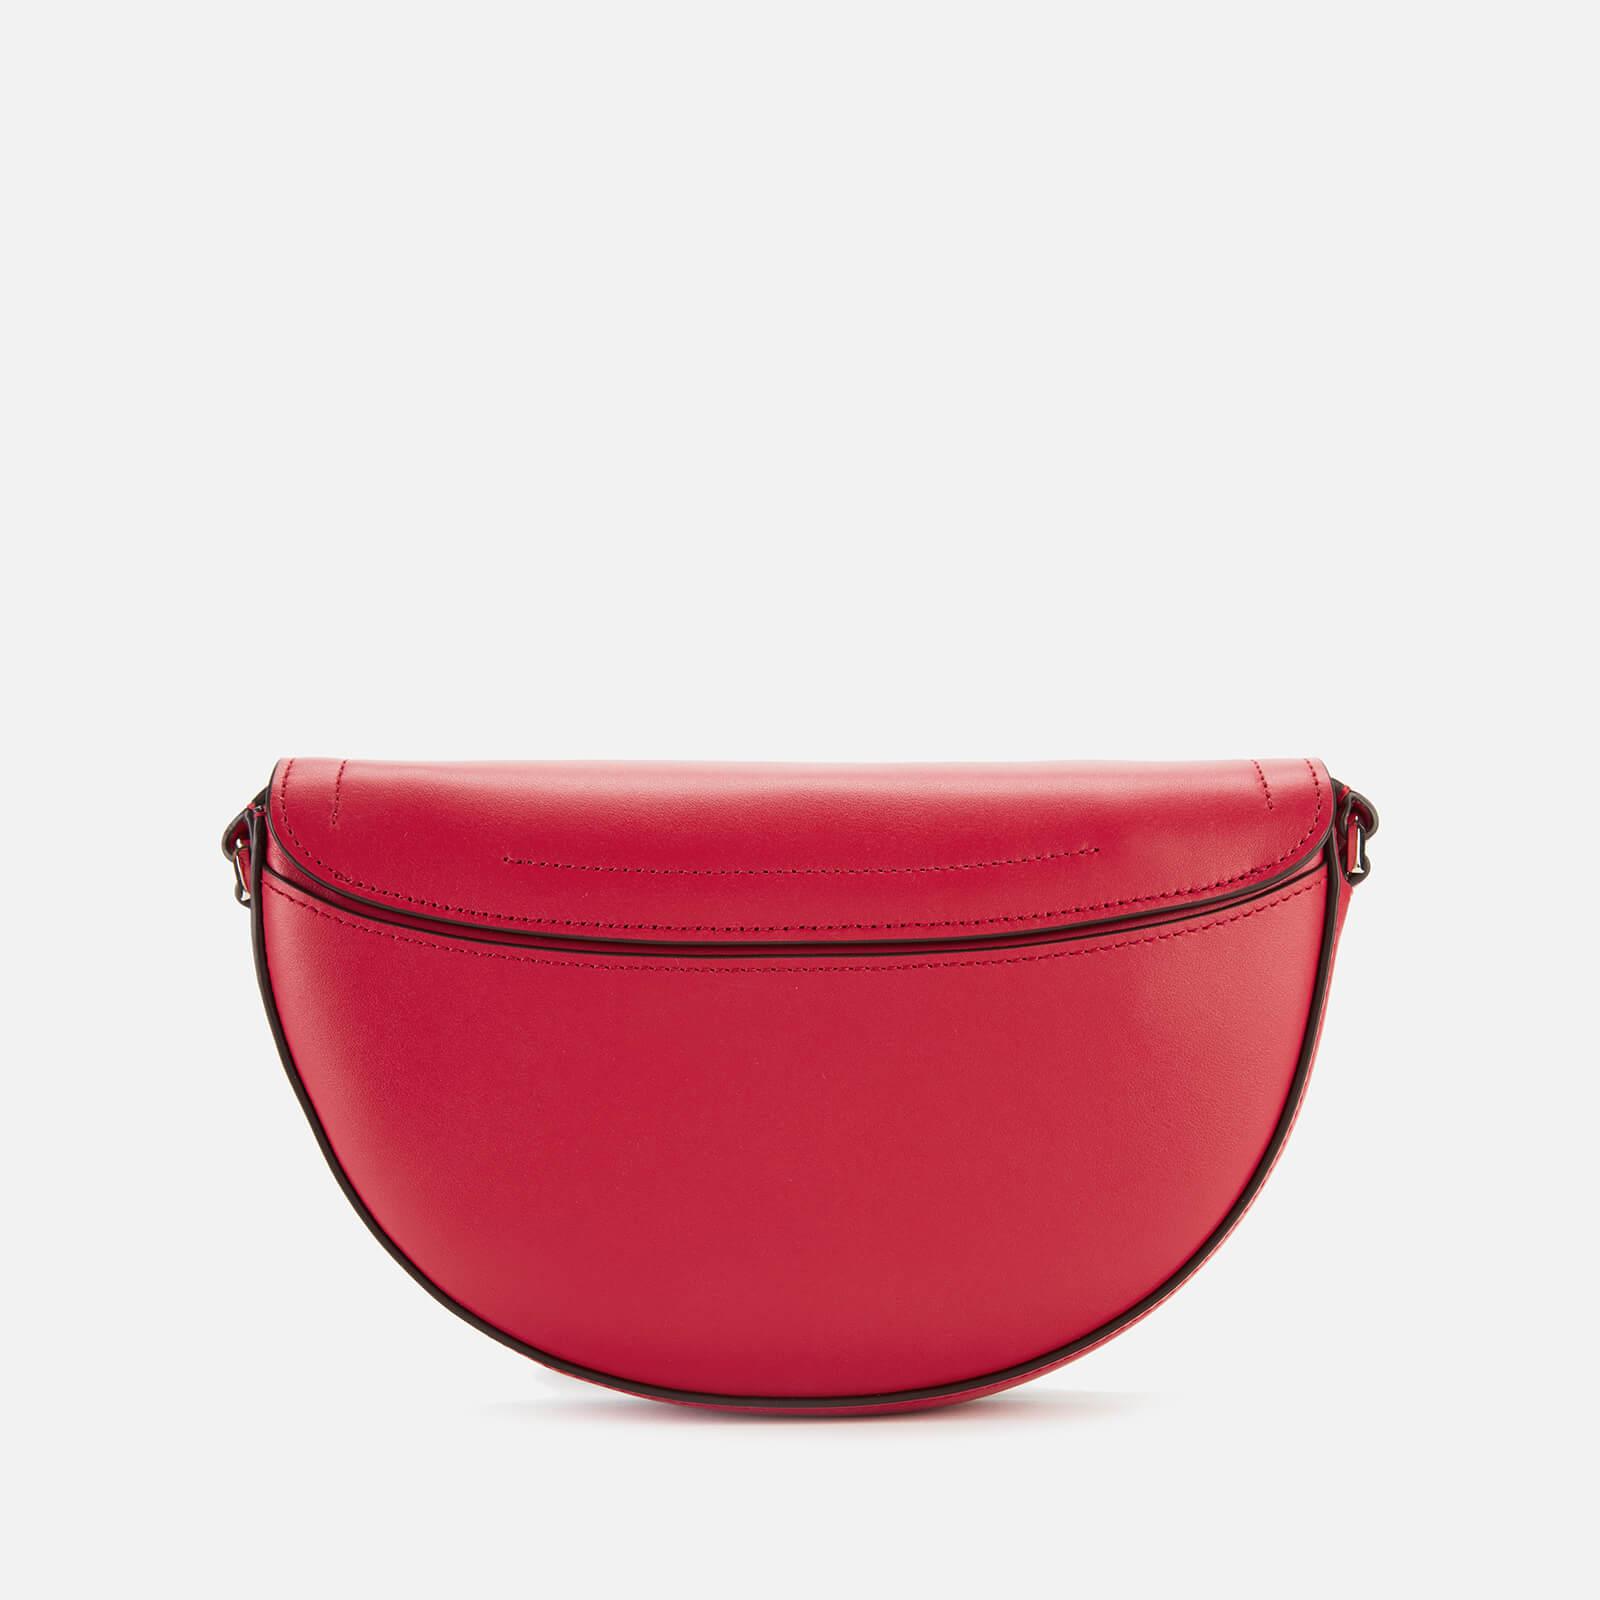 Kate Spade Leather Andi Half Moon Cross Body Bag in Red - Lyst